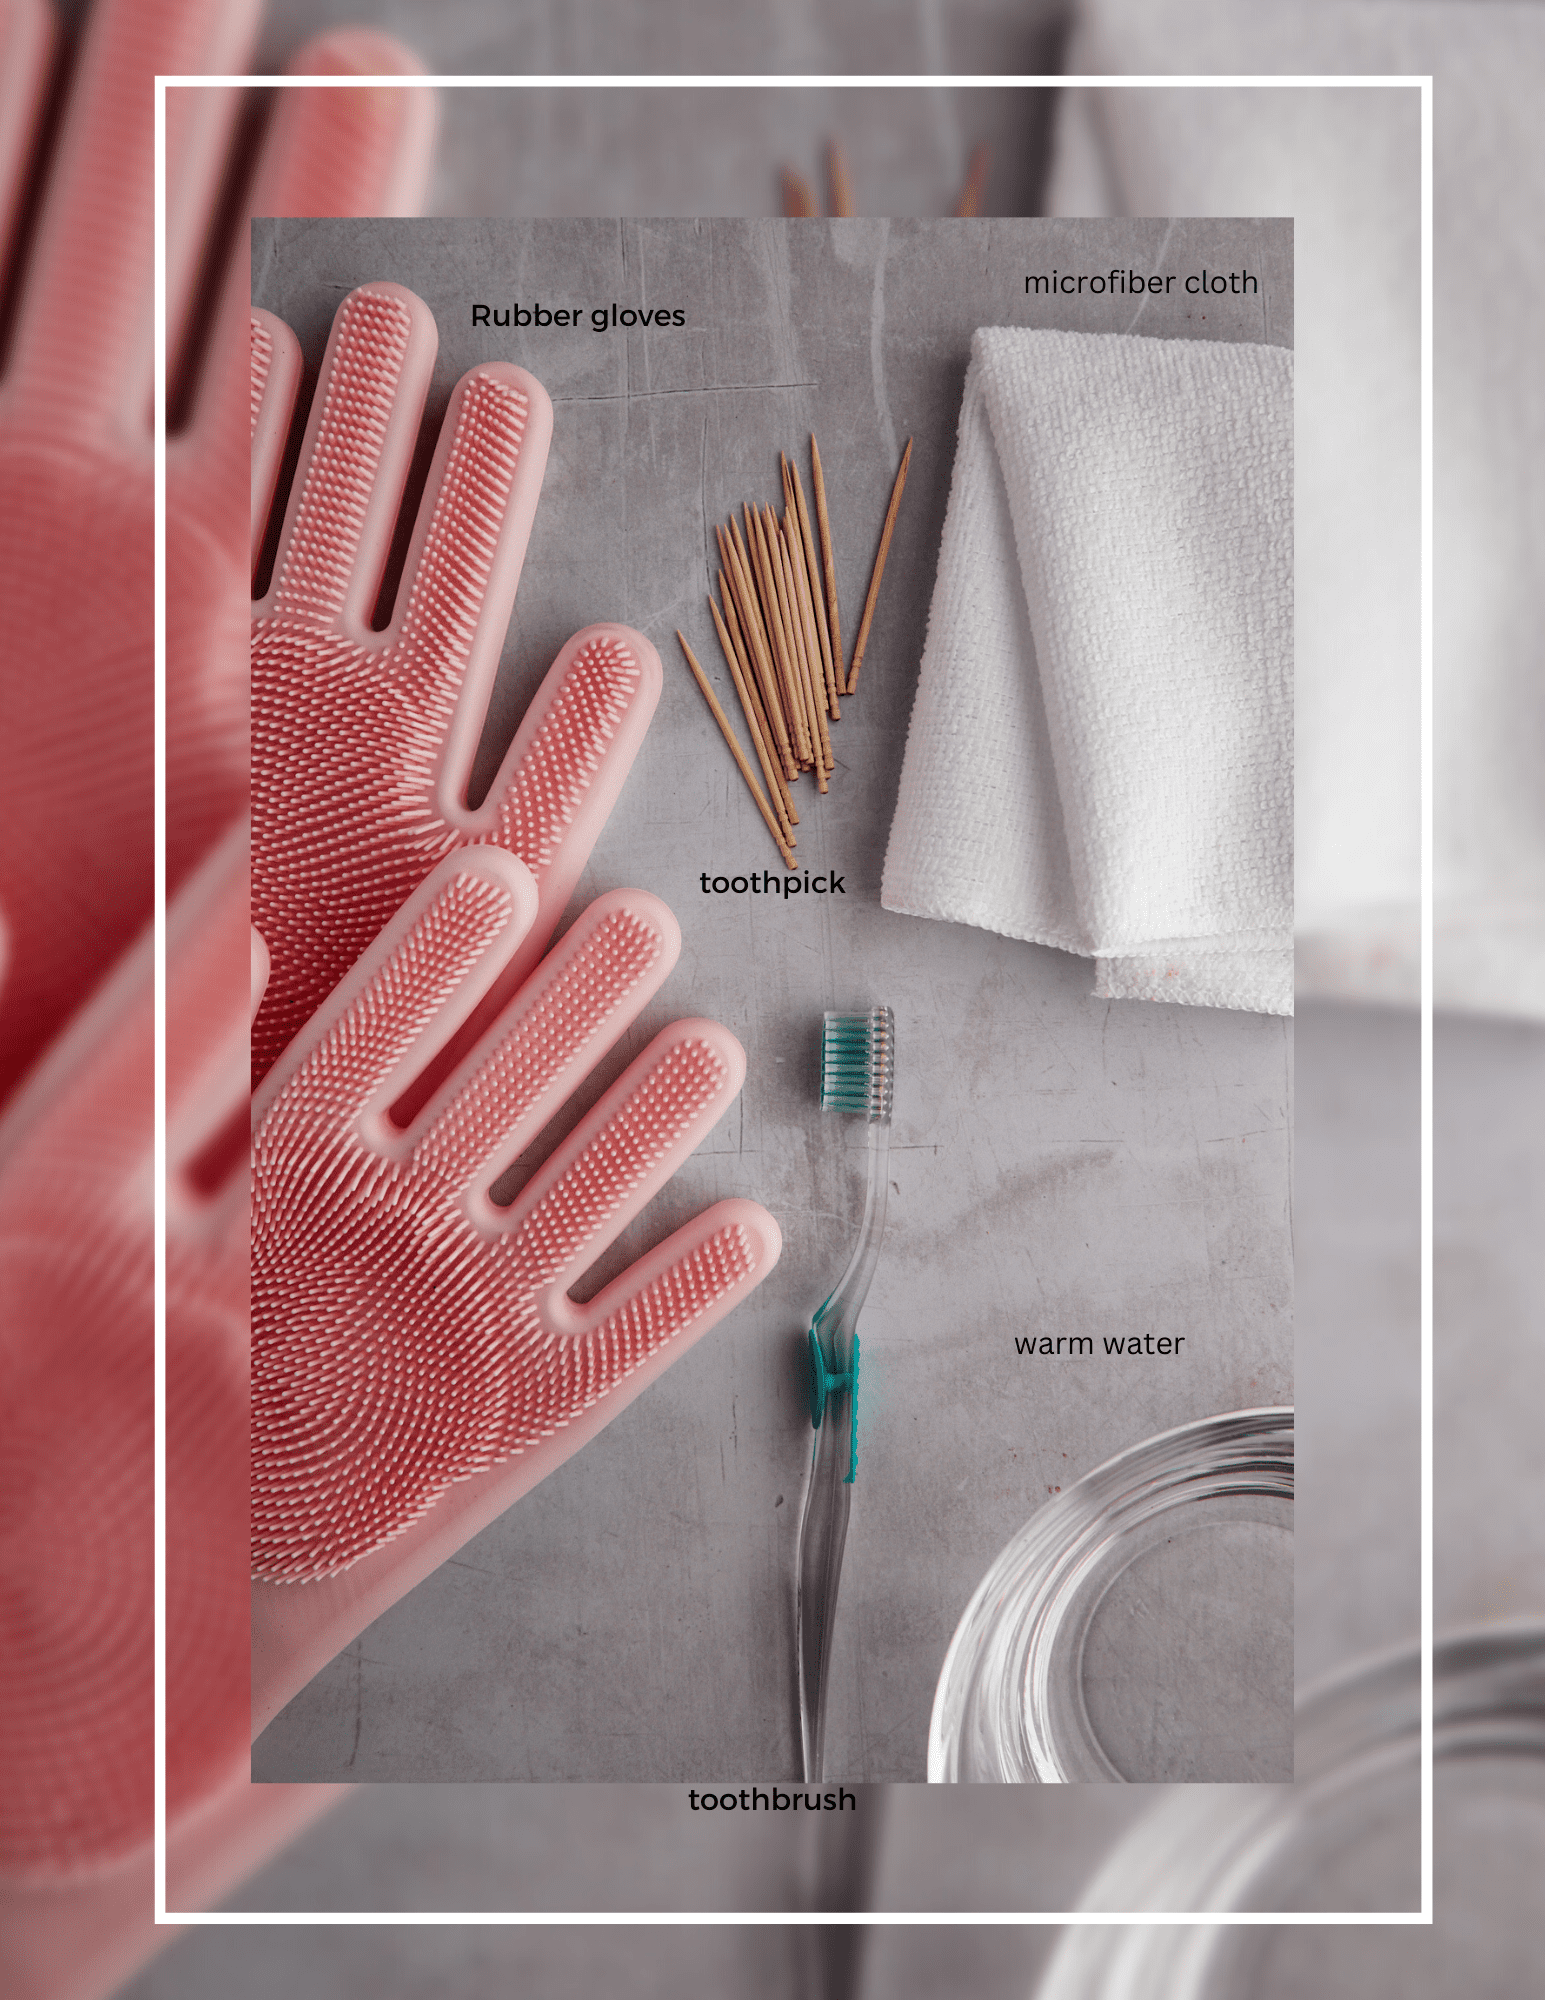 Overhead image of pink rubber gloves, toothpicks, a microfiber cloth, a toothbrush, and a bowl of warm water. 